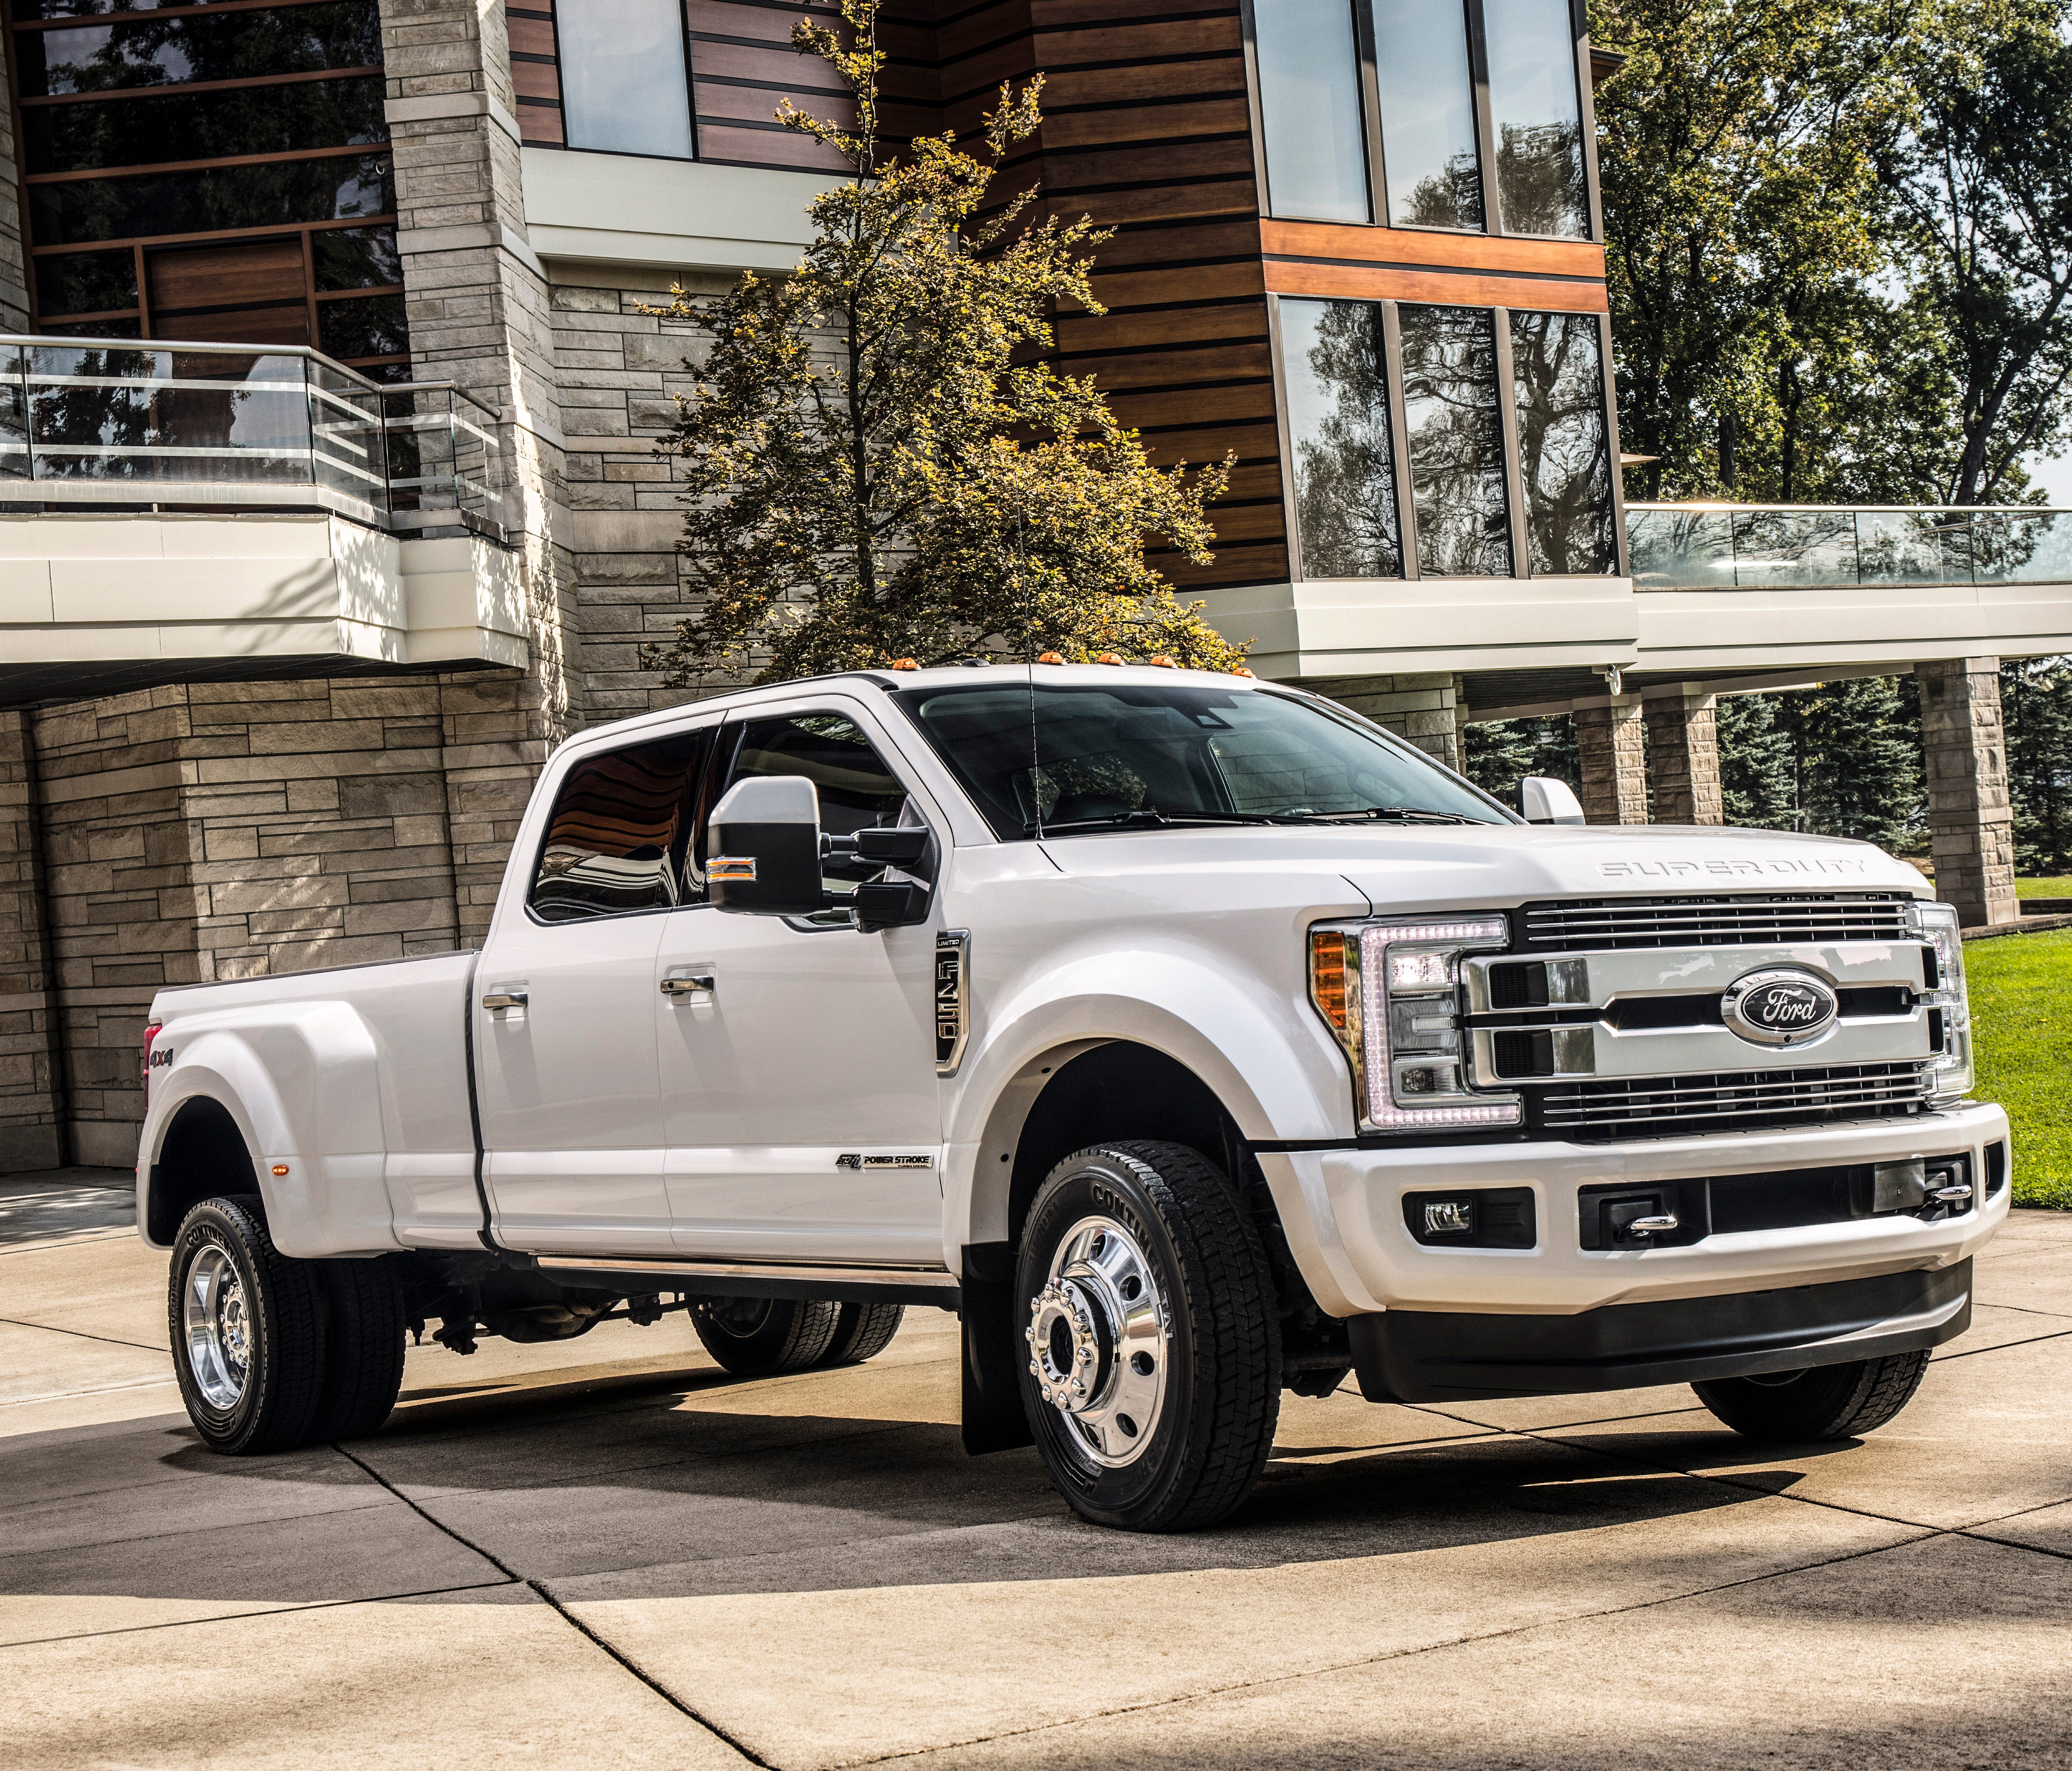 Ford says the new F-Series Super Duty Limited will be the most capable